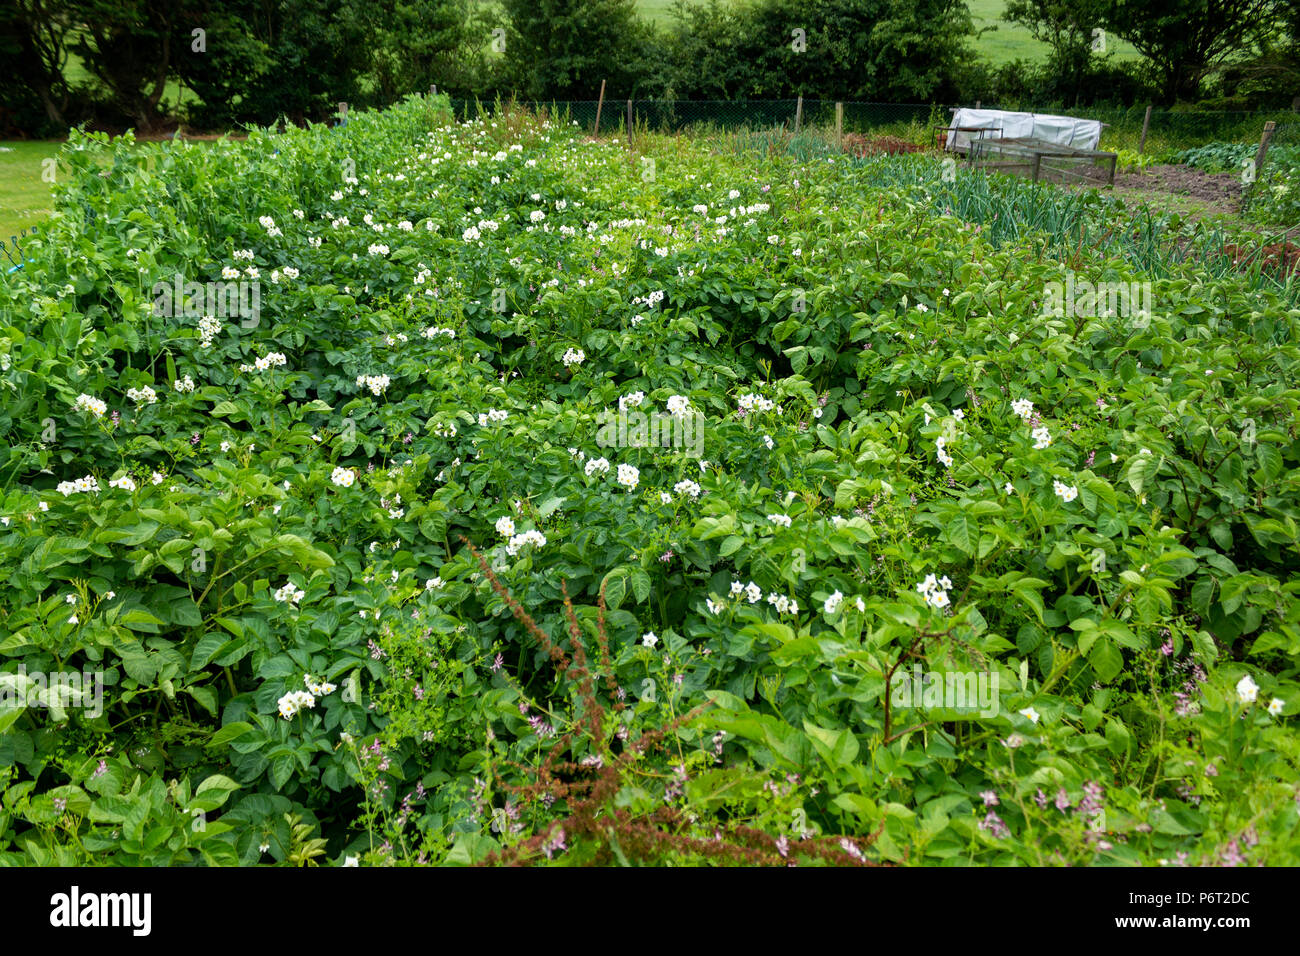 garden vegetable plot growing onions, potatoes, salad crops, peas, and lettuce. Stock Photo